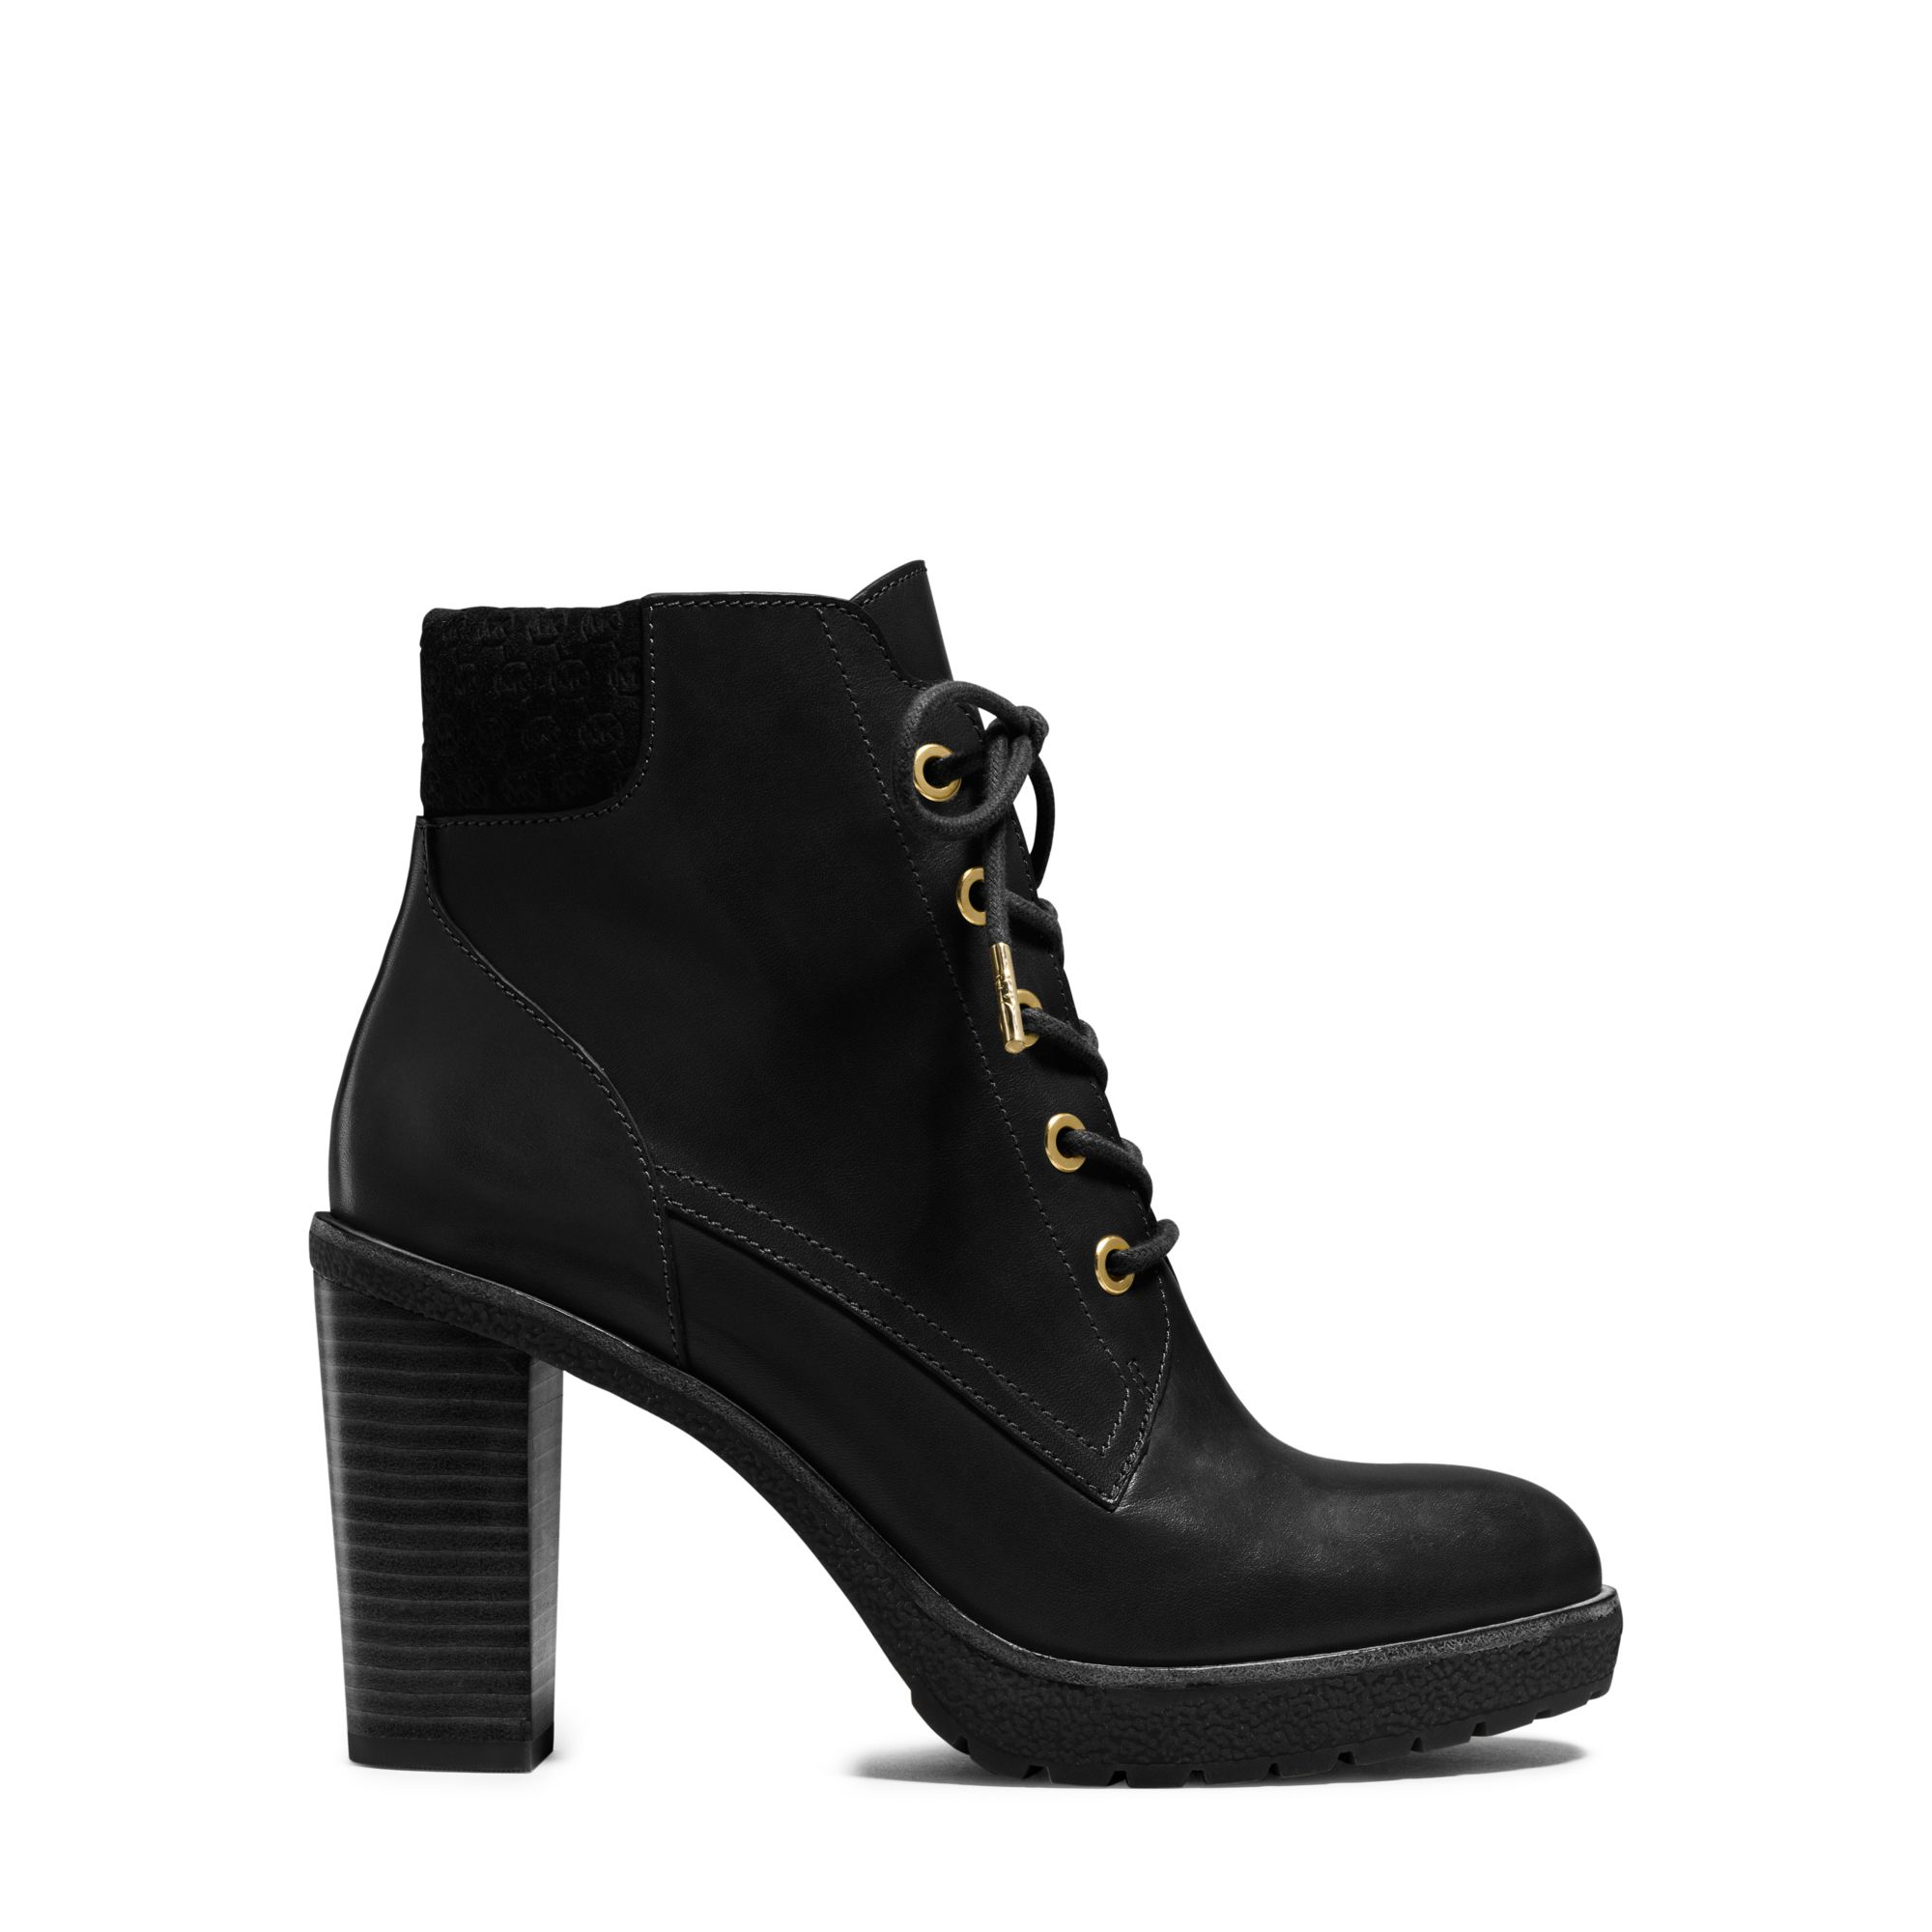 Lyst - Michael kors Kim Lace-up Leather Ankle Boot in Black